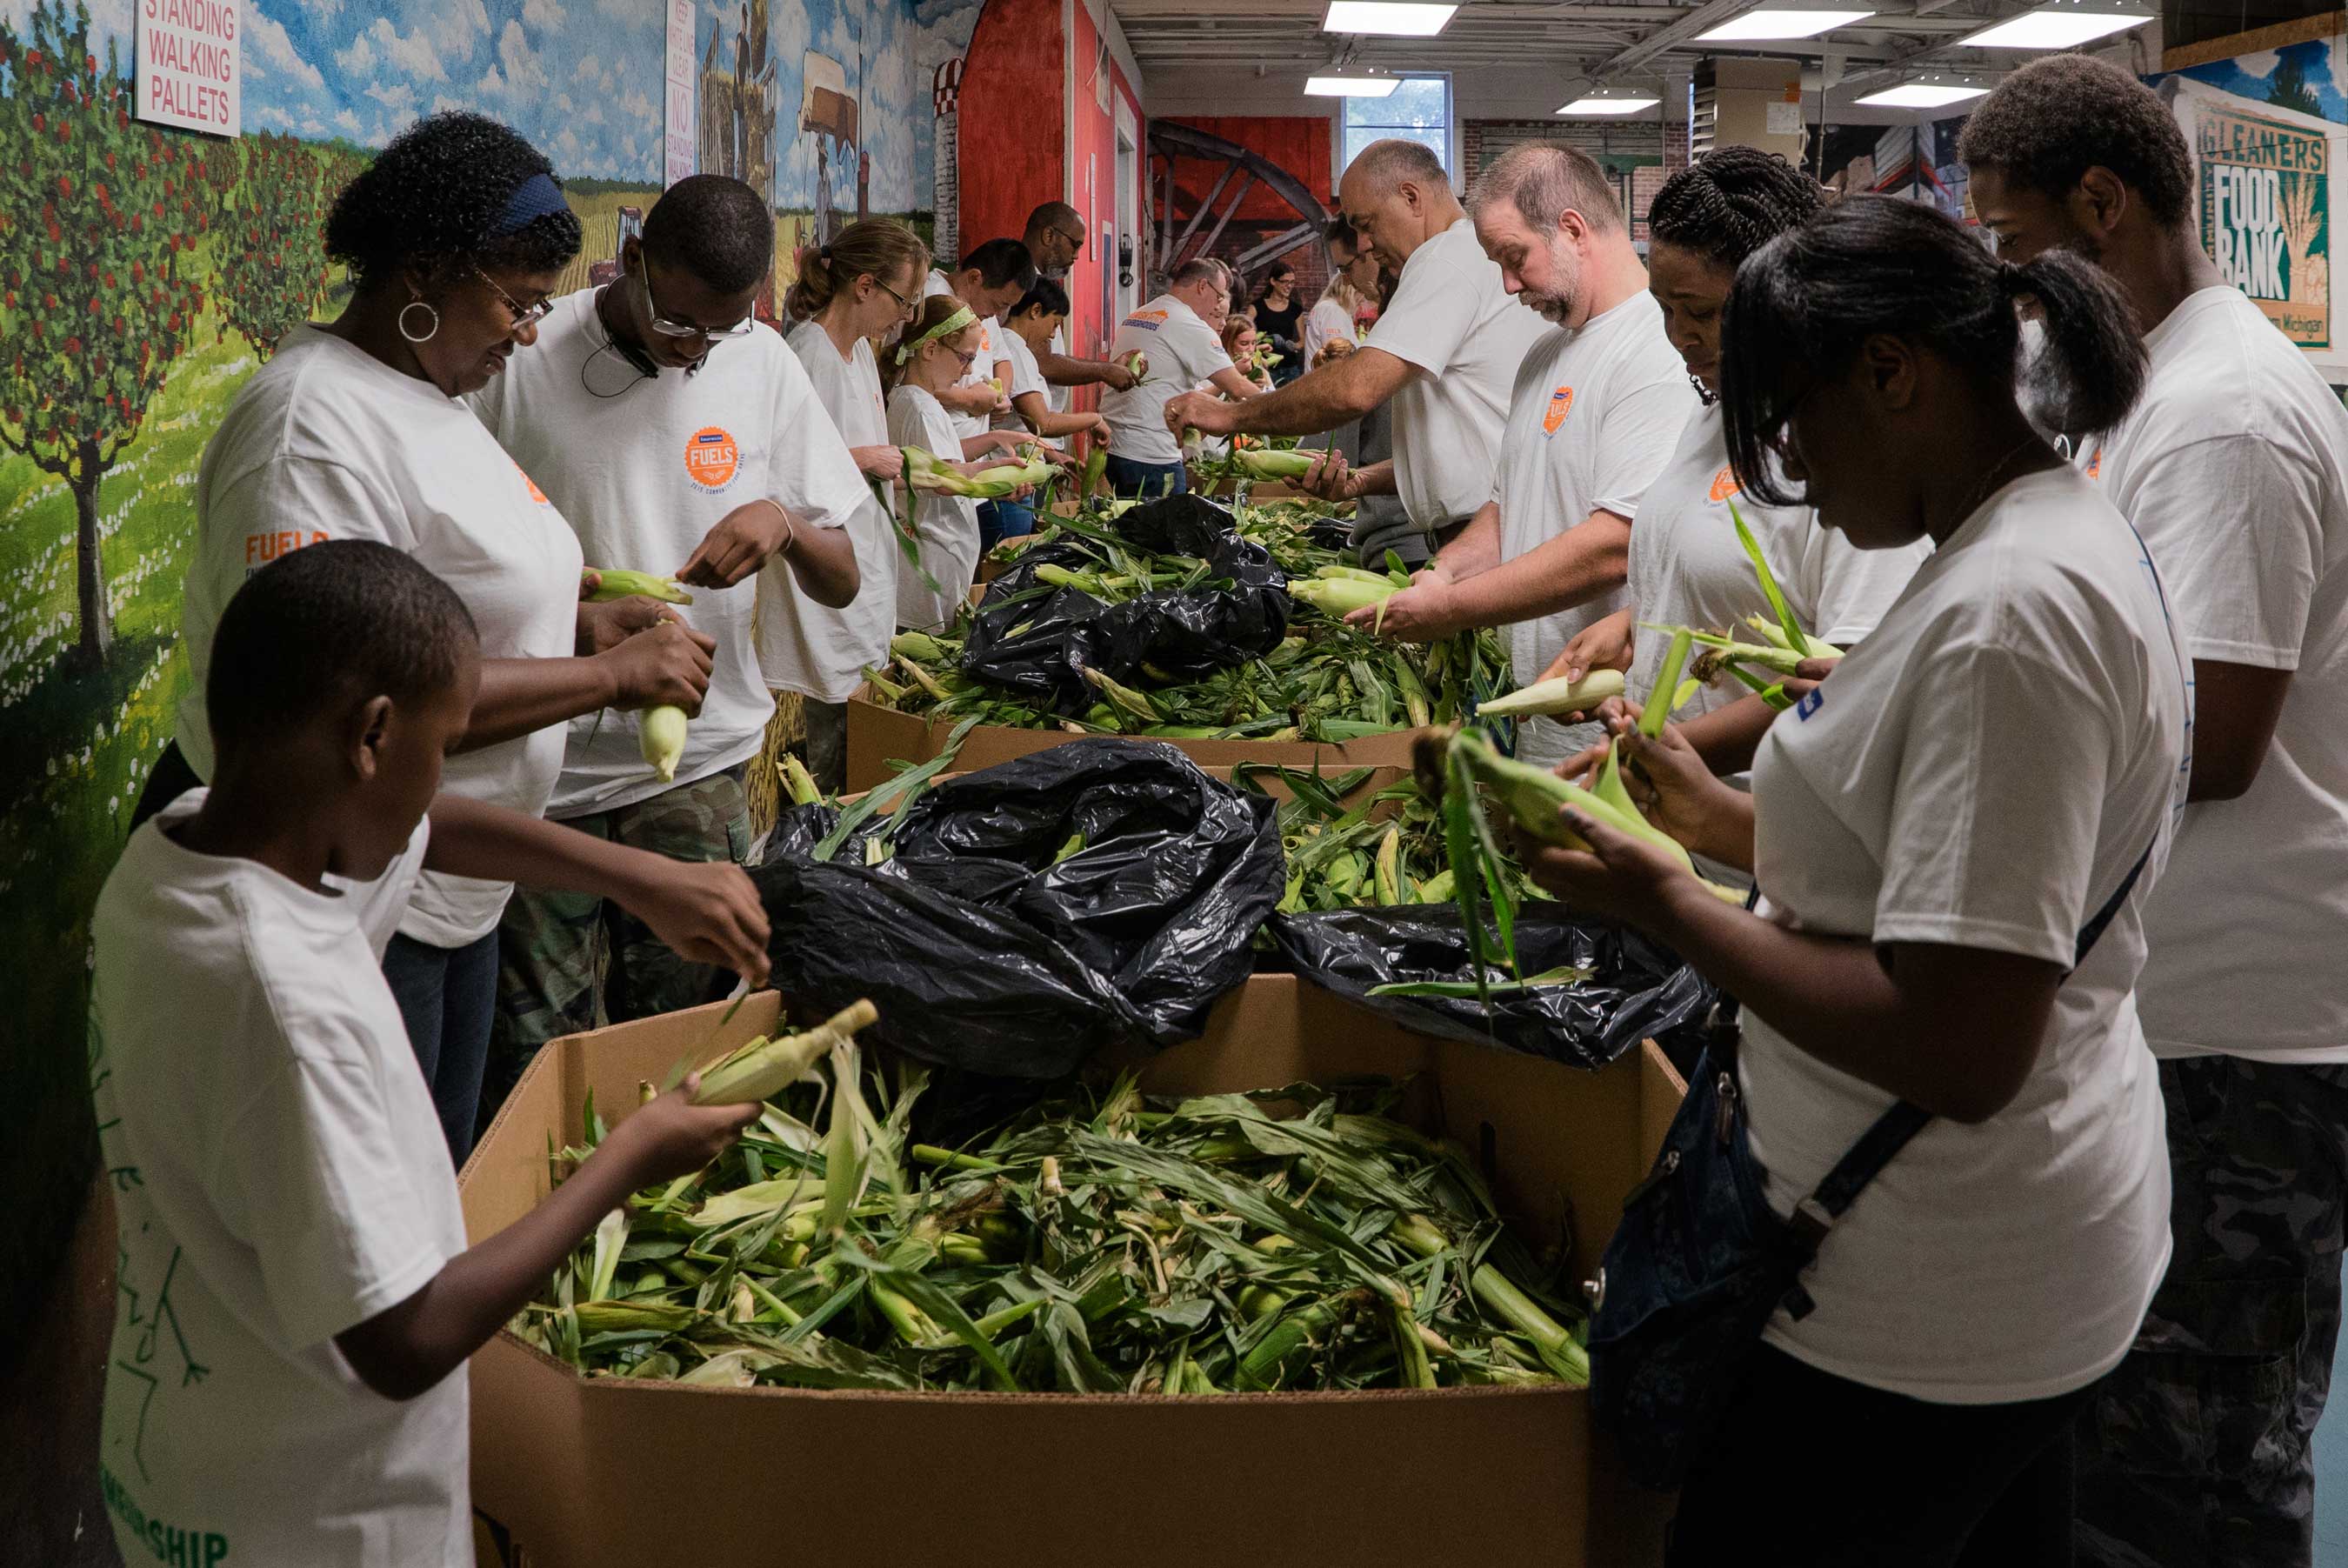 Through a different take on the assembly line, employees from Faurecia’s North America headquarters in Auburn Hills, Michigan, show it takes a village to help nourish local communities in need. 